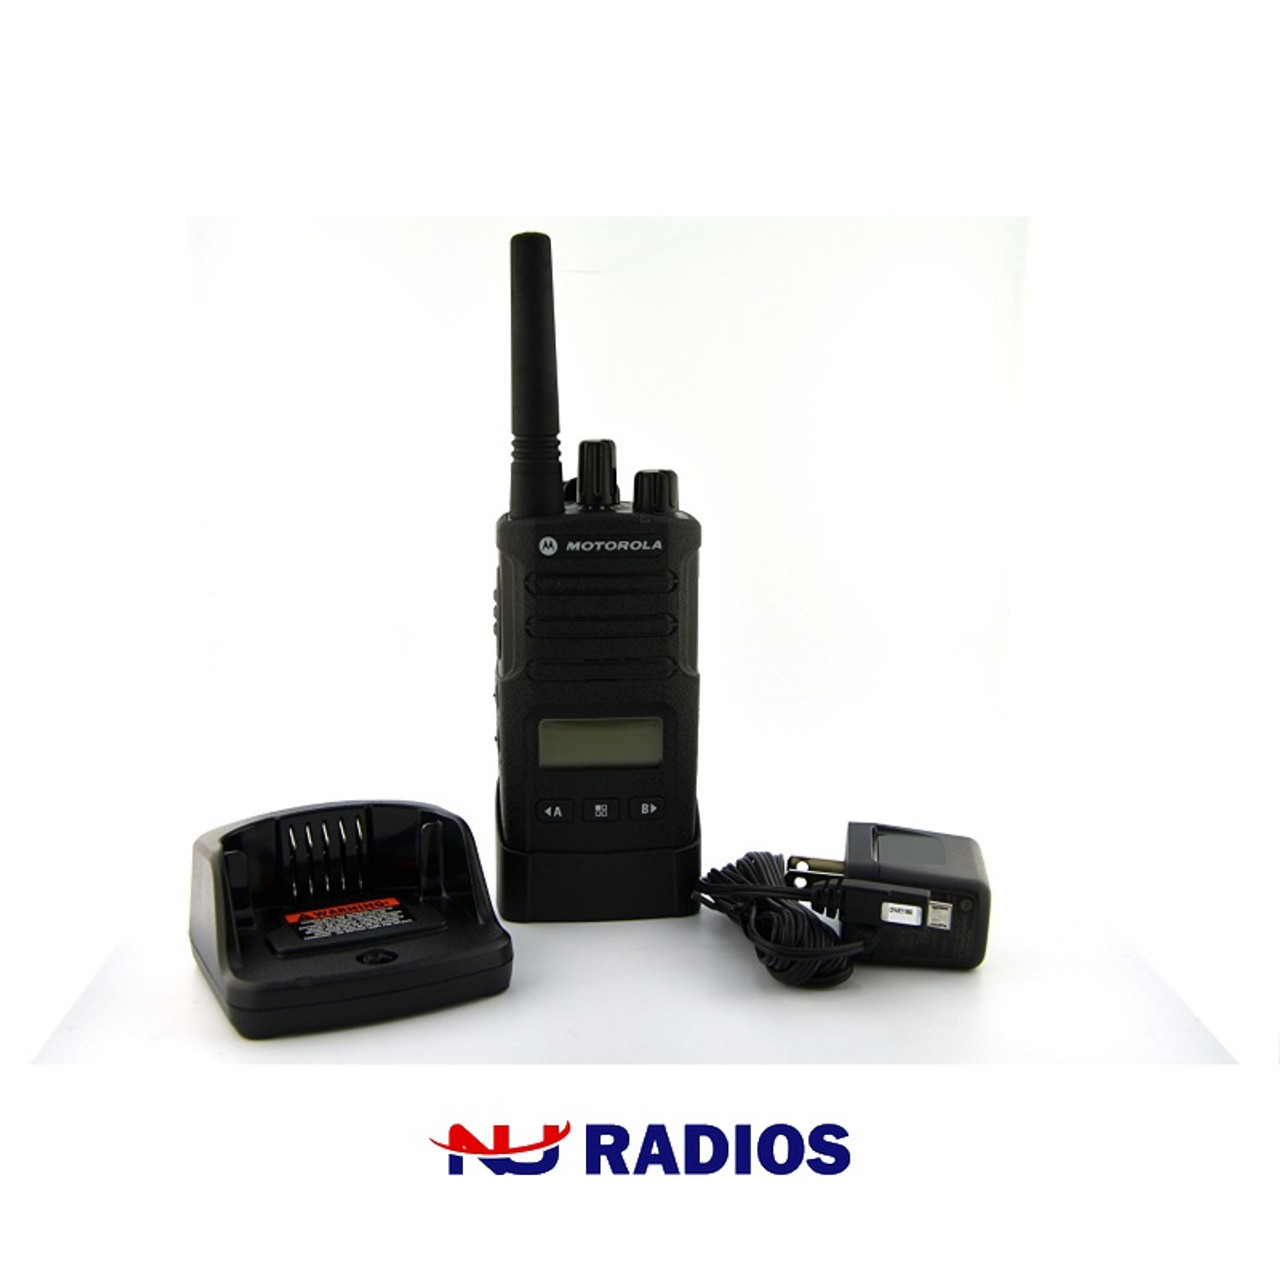 Great Buy, a six pack of Motorola RMU2080D (Display) radios are great for  most warehouse and retail stores that want an easy to use radio that is  durable. Plus, NOAA alerts.